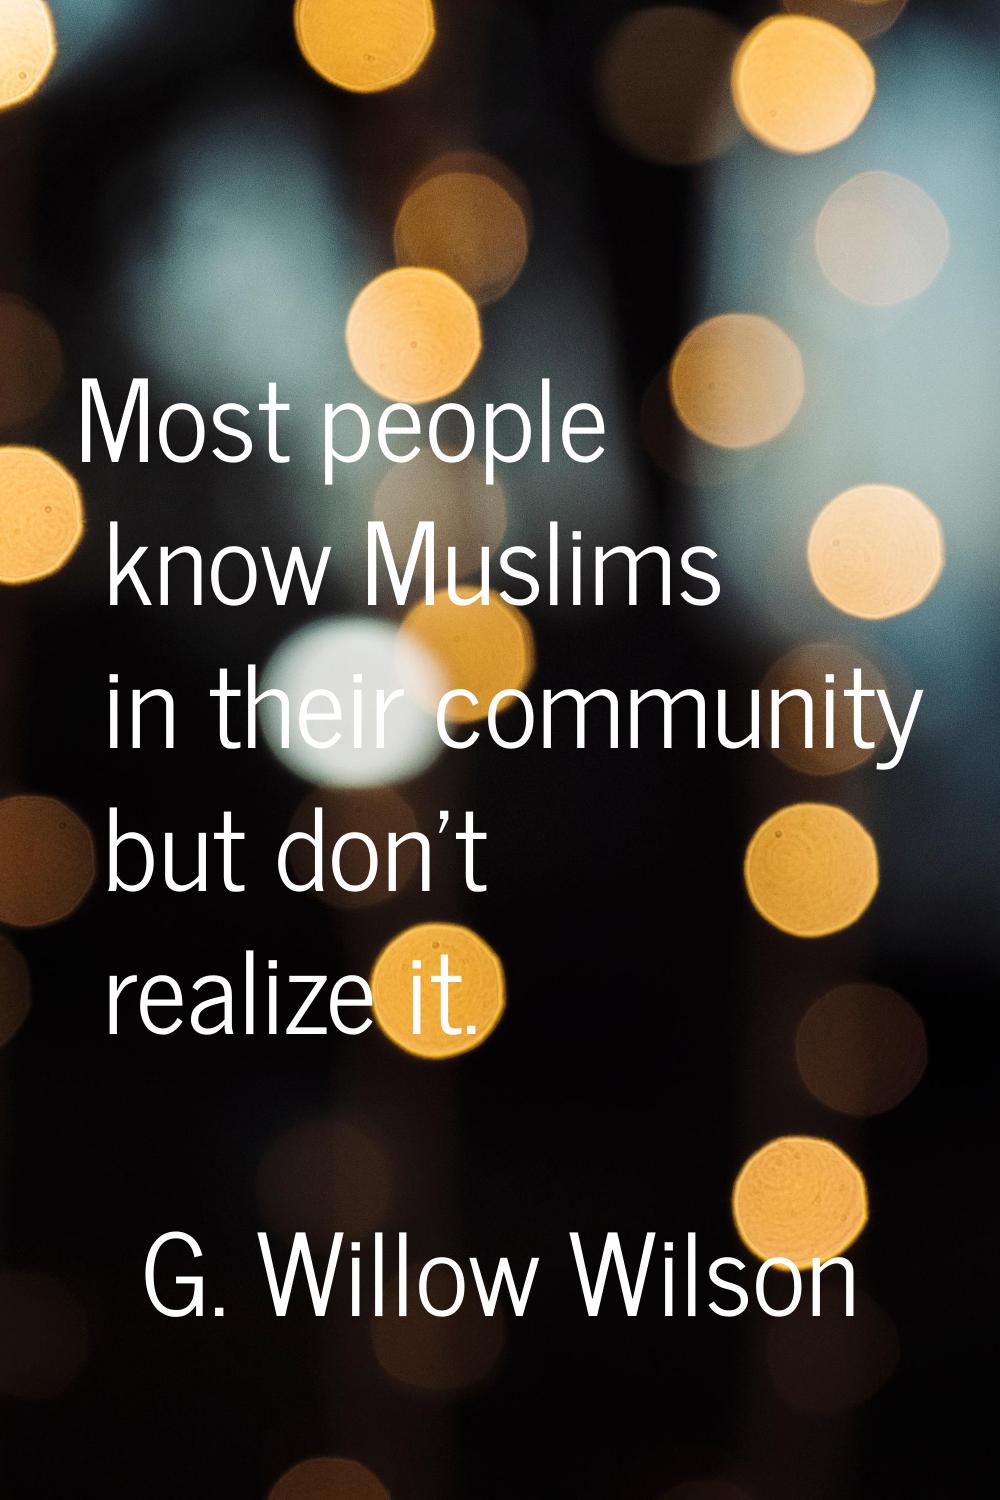 Most people know Muslims in their community but don't realize it.